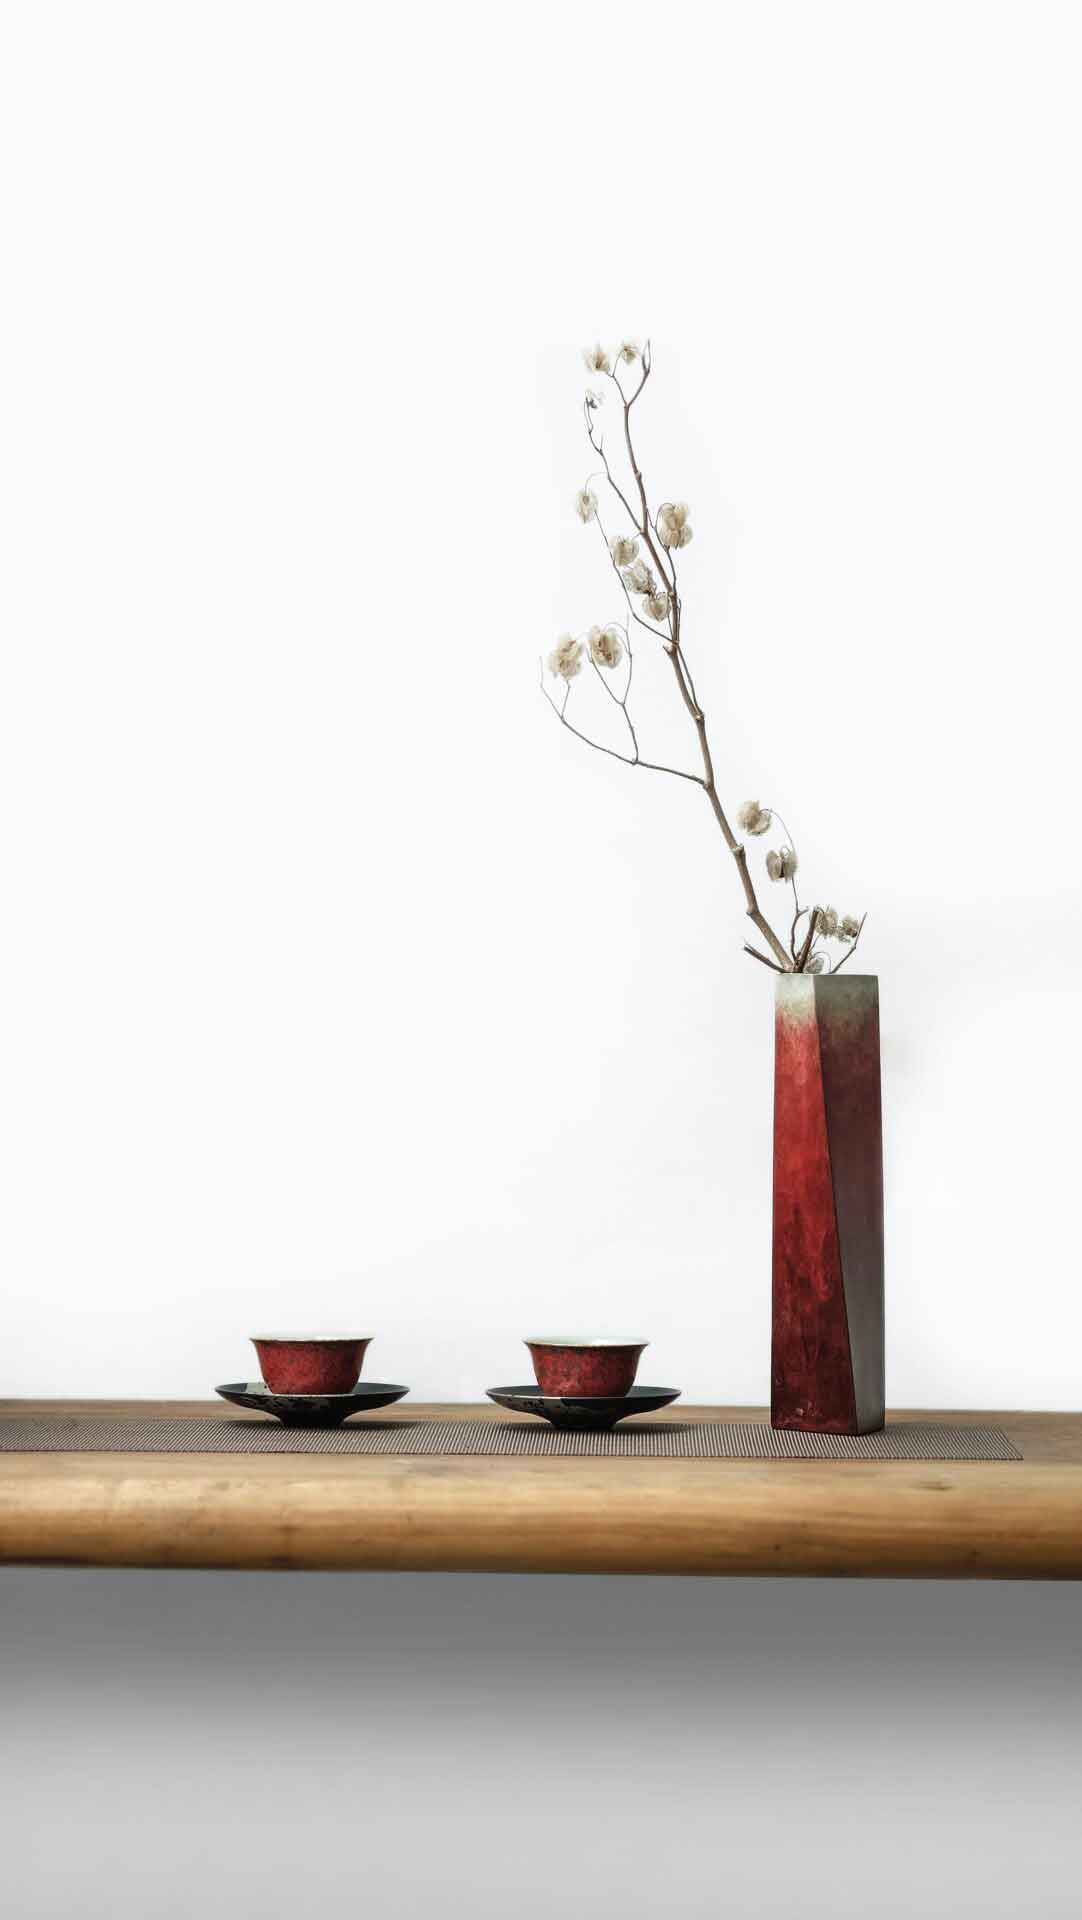 What is the difference between flower arrangement and ikebana?